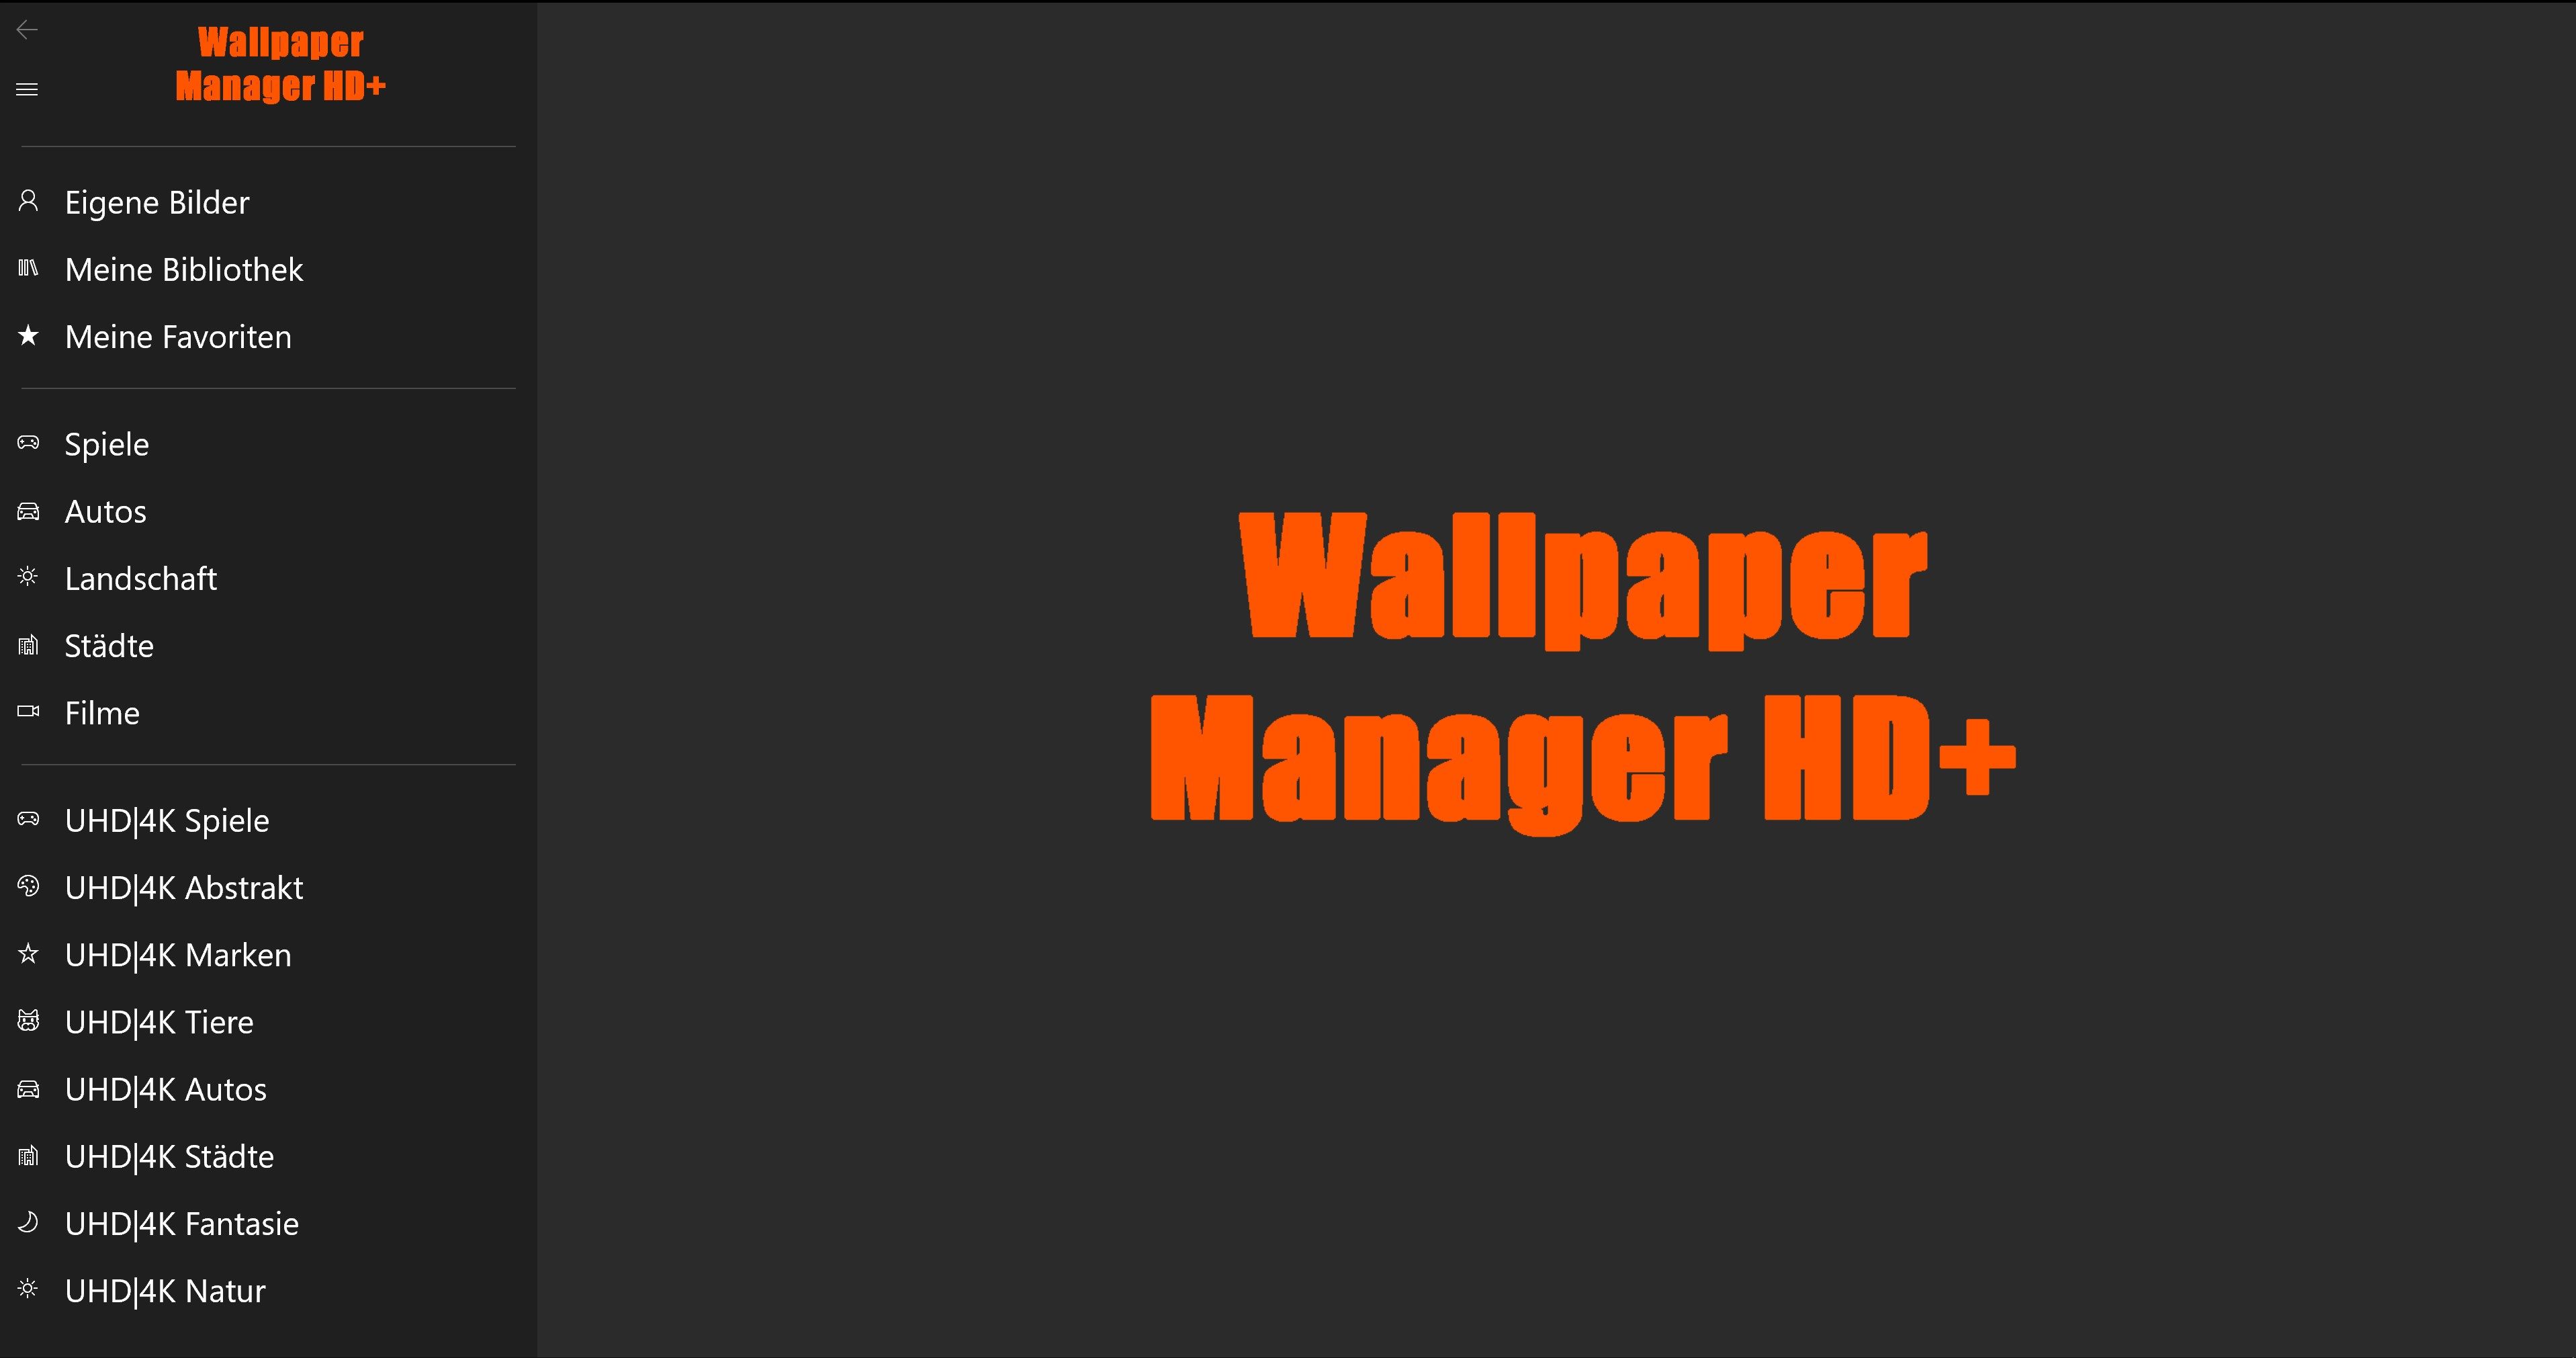 Wallpaper Manager HD+